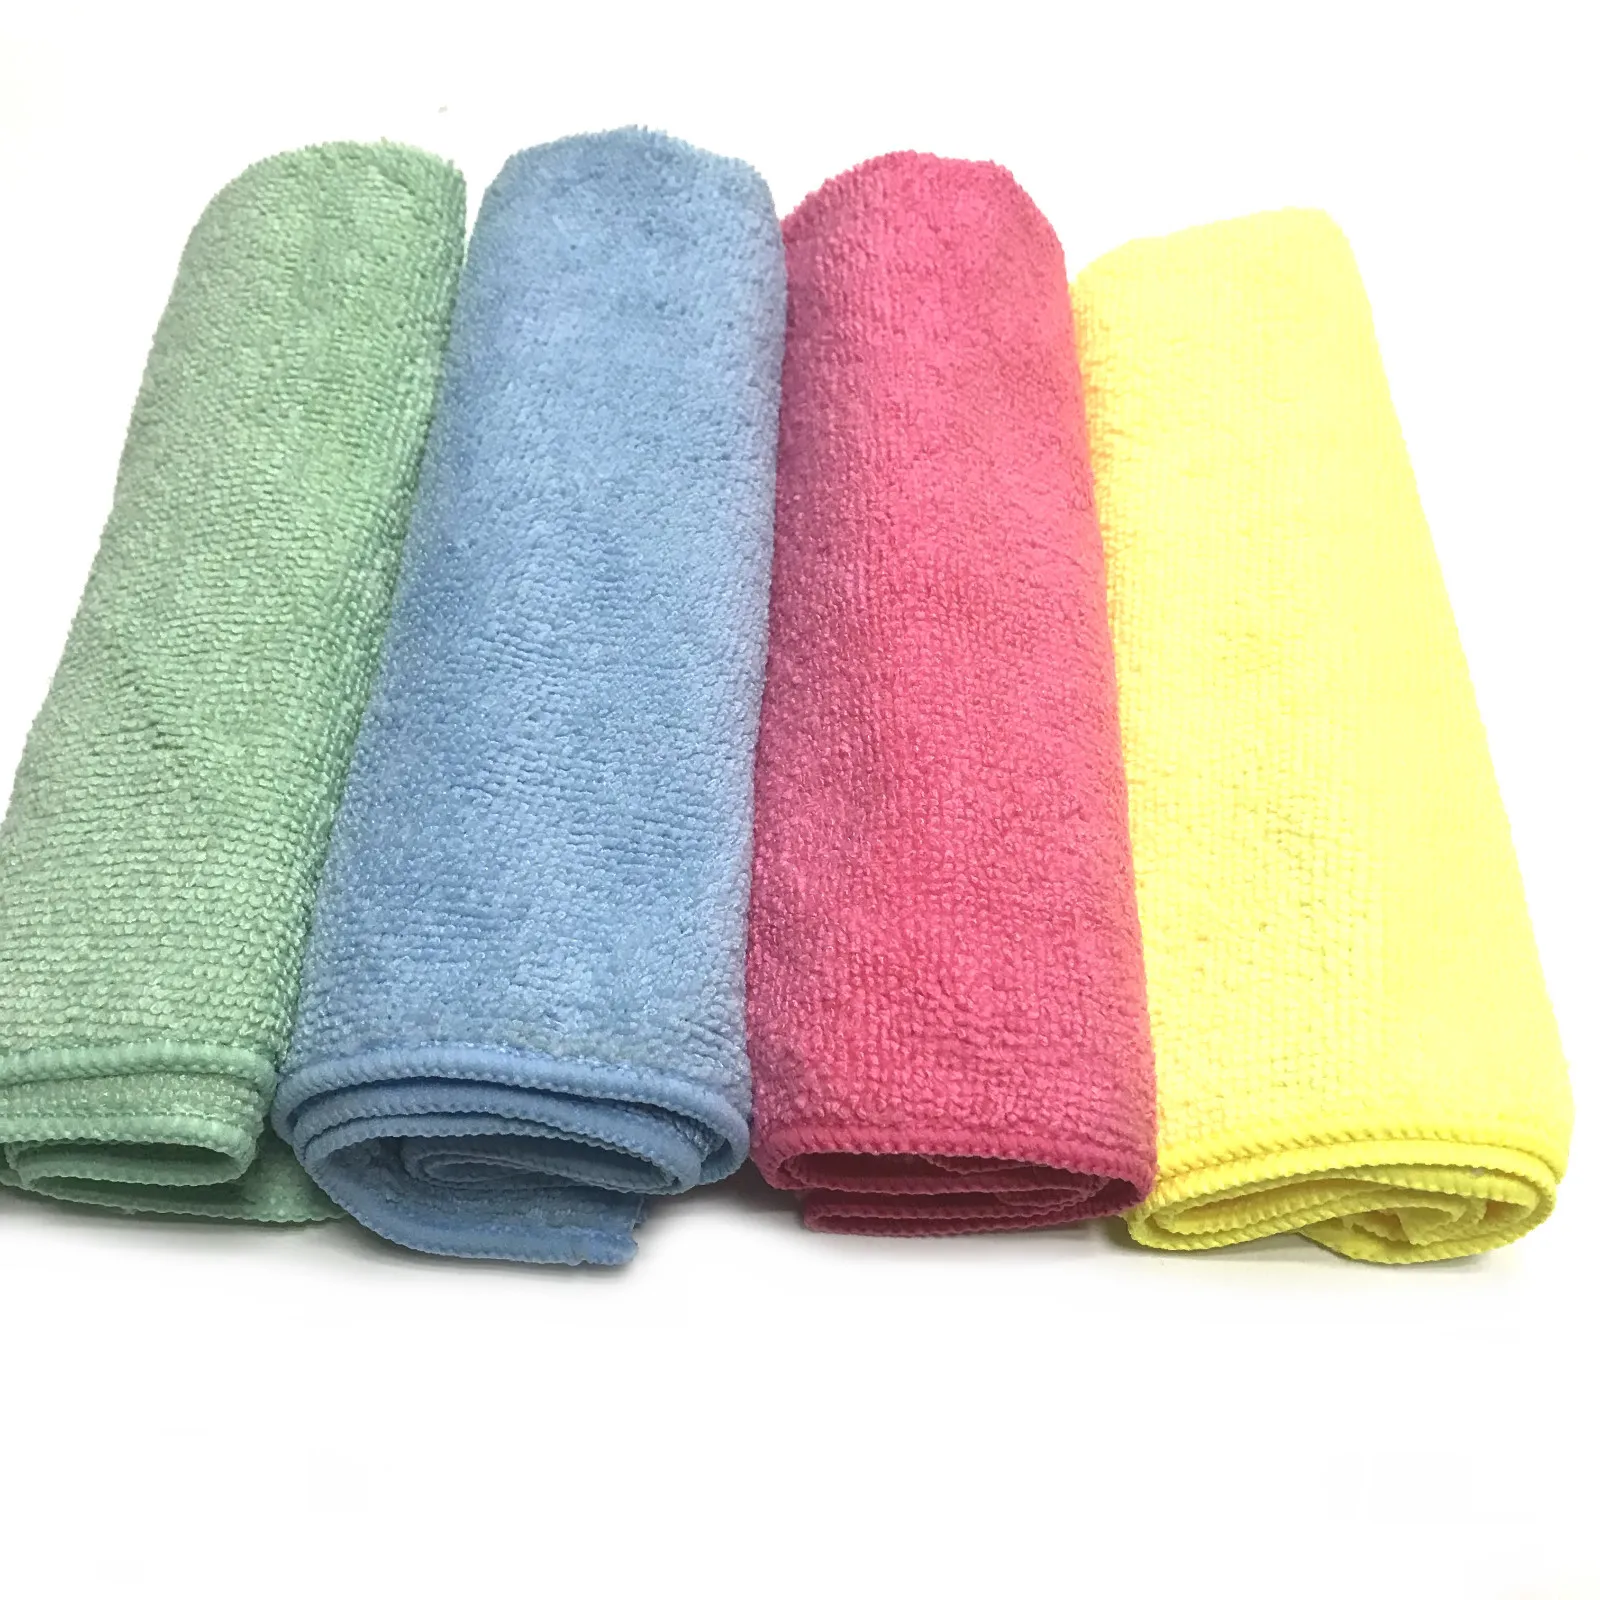 LOT Of Micro fibre cleaning cloth unispun brand 40*40 cm in 4 colors 